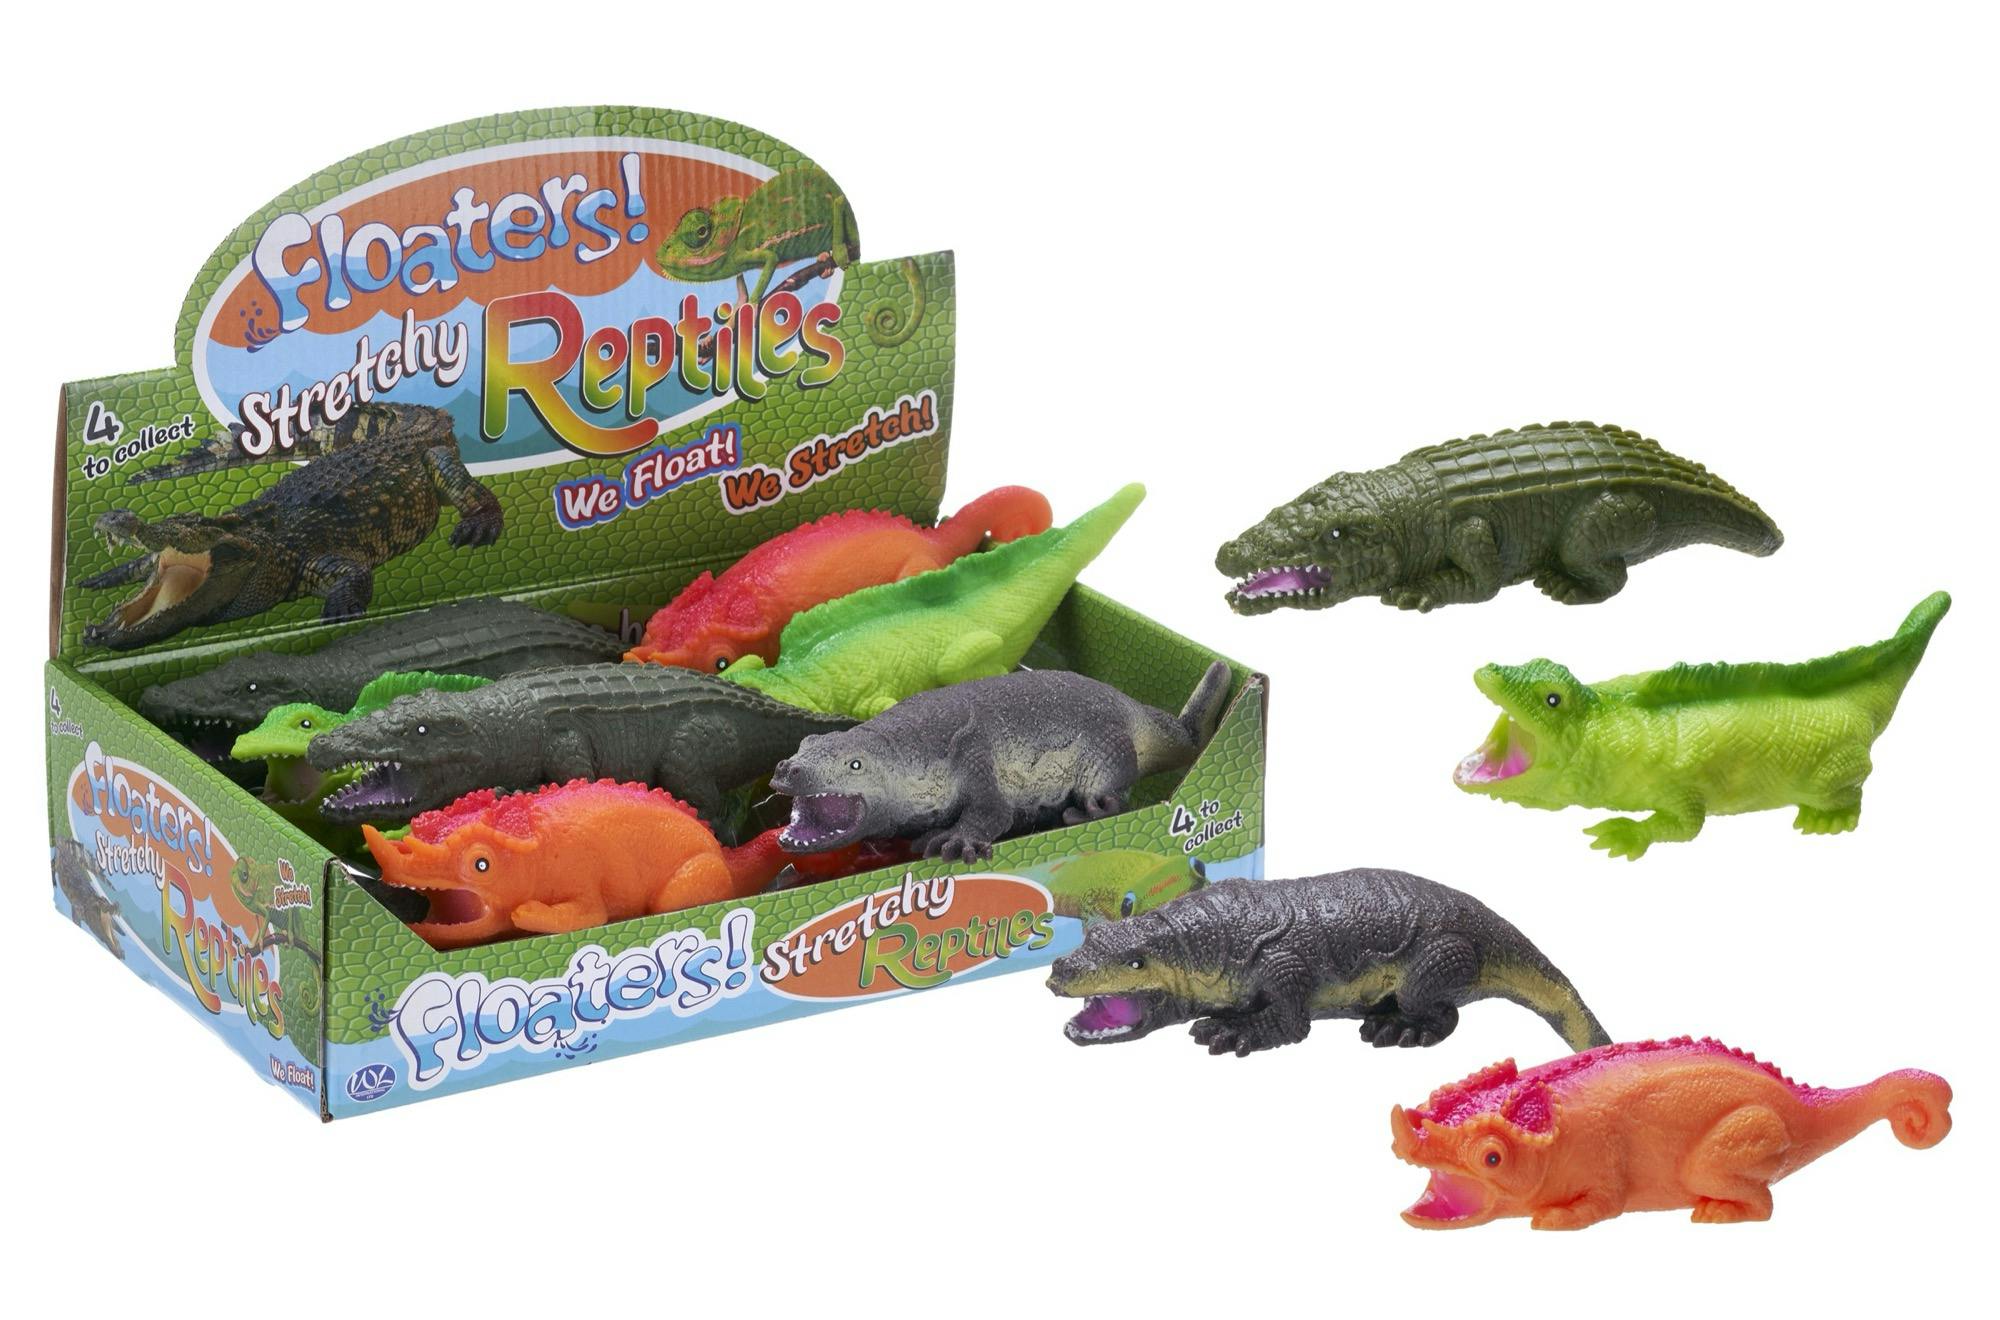 Product - "Floaters" Stretchy Reptiles 4 Ass